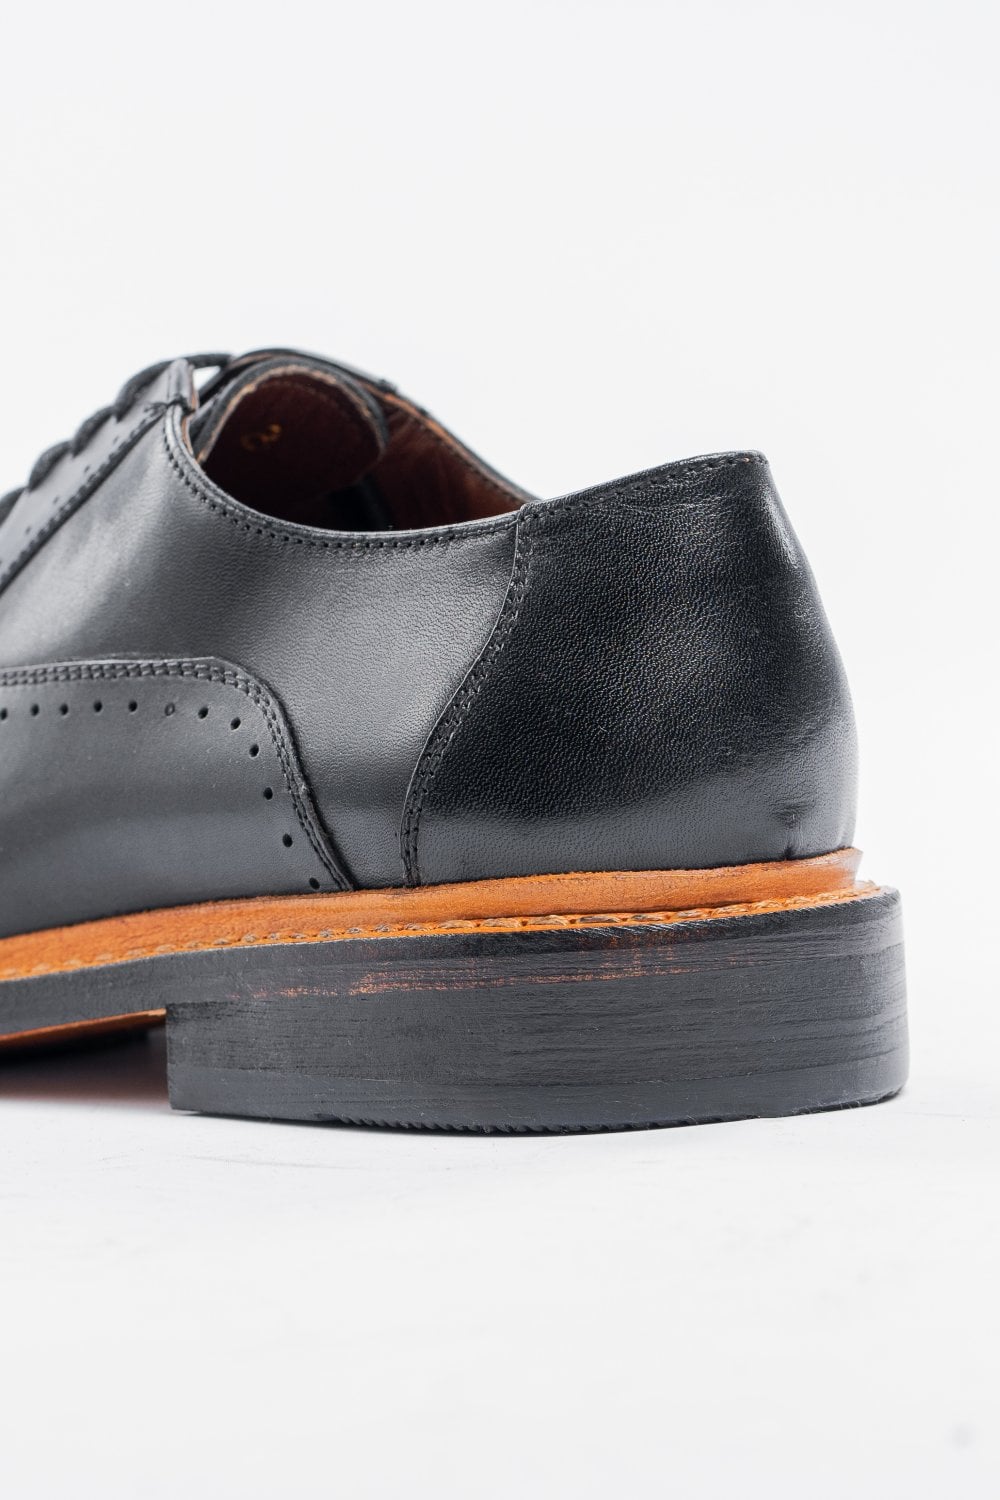 Brentwood Black Shoes - Shoes - - THREADPEPPER